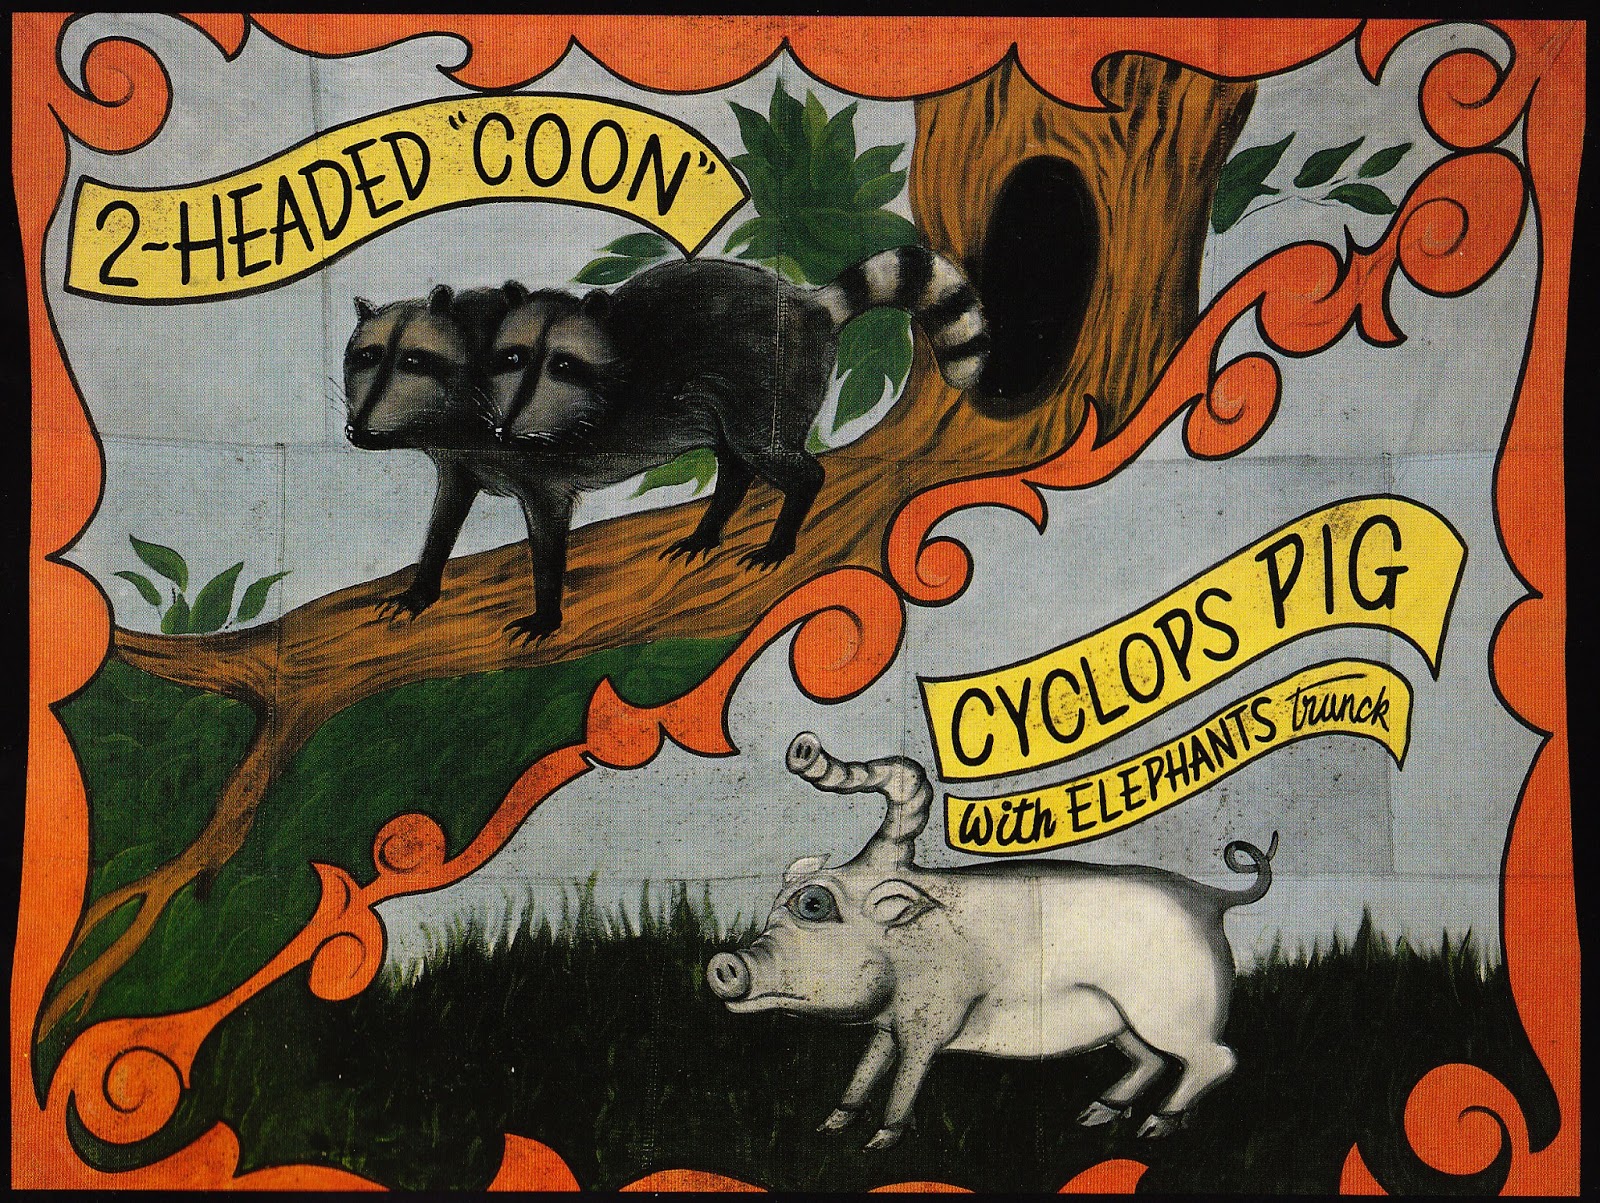 poster - Lllladed Coon 77 Cyclops Pig With Elephants Trnce